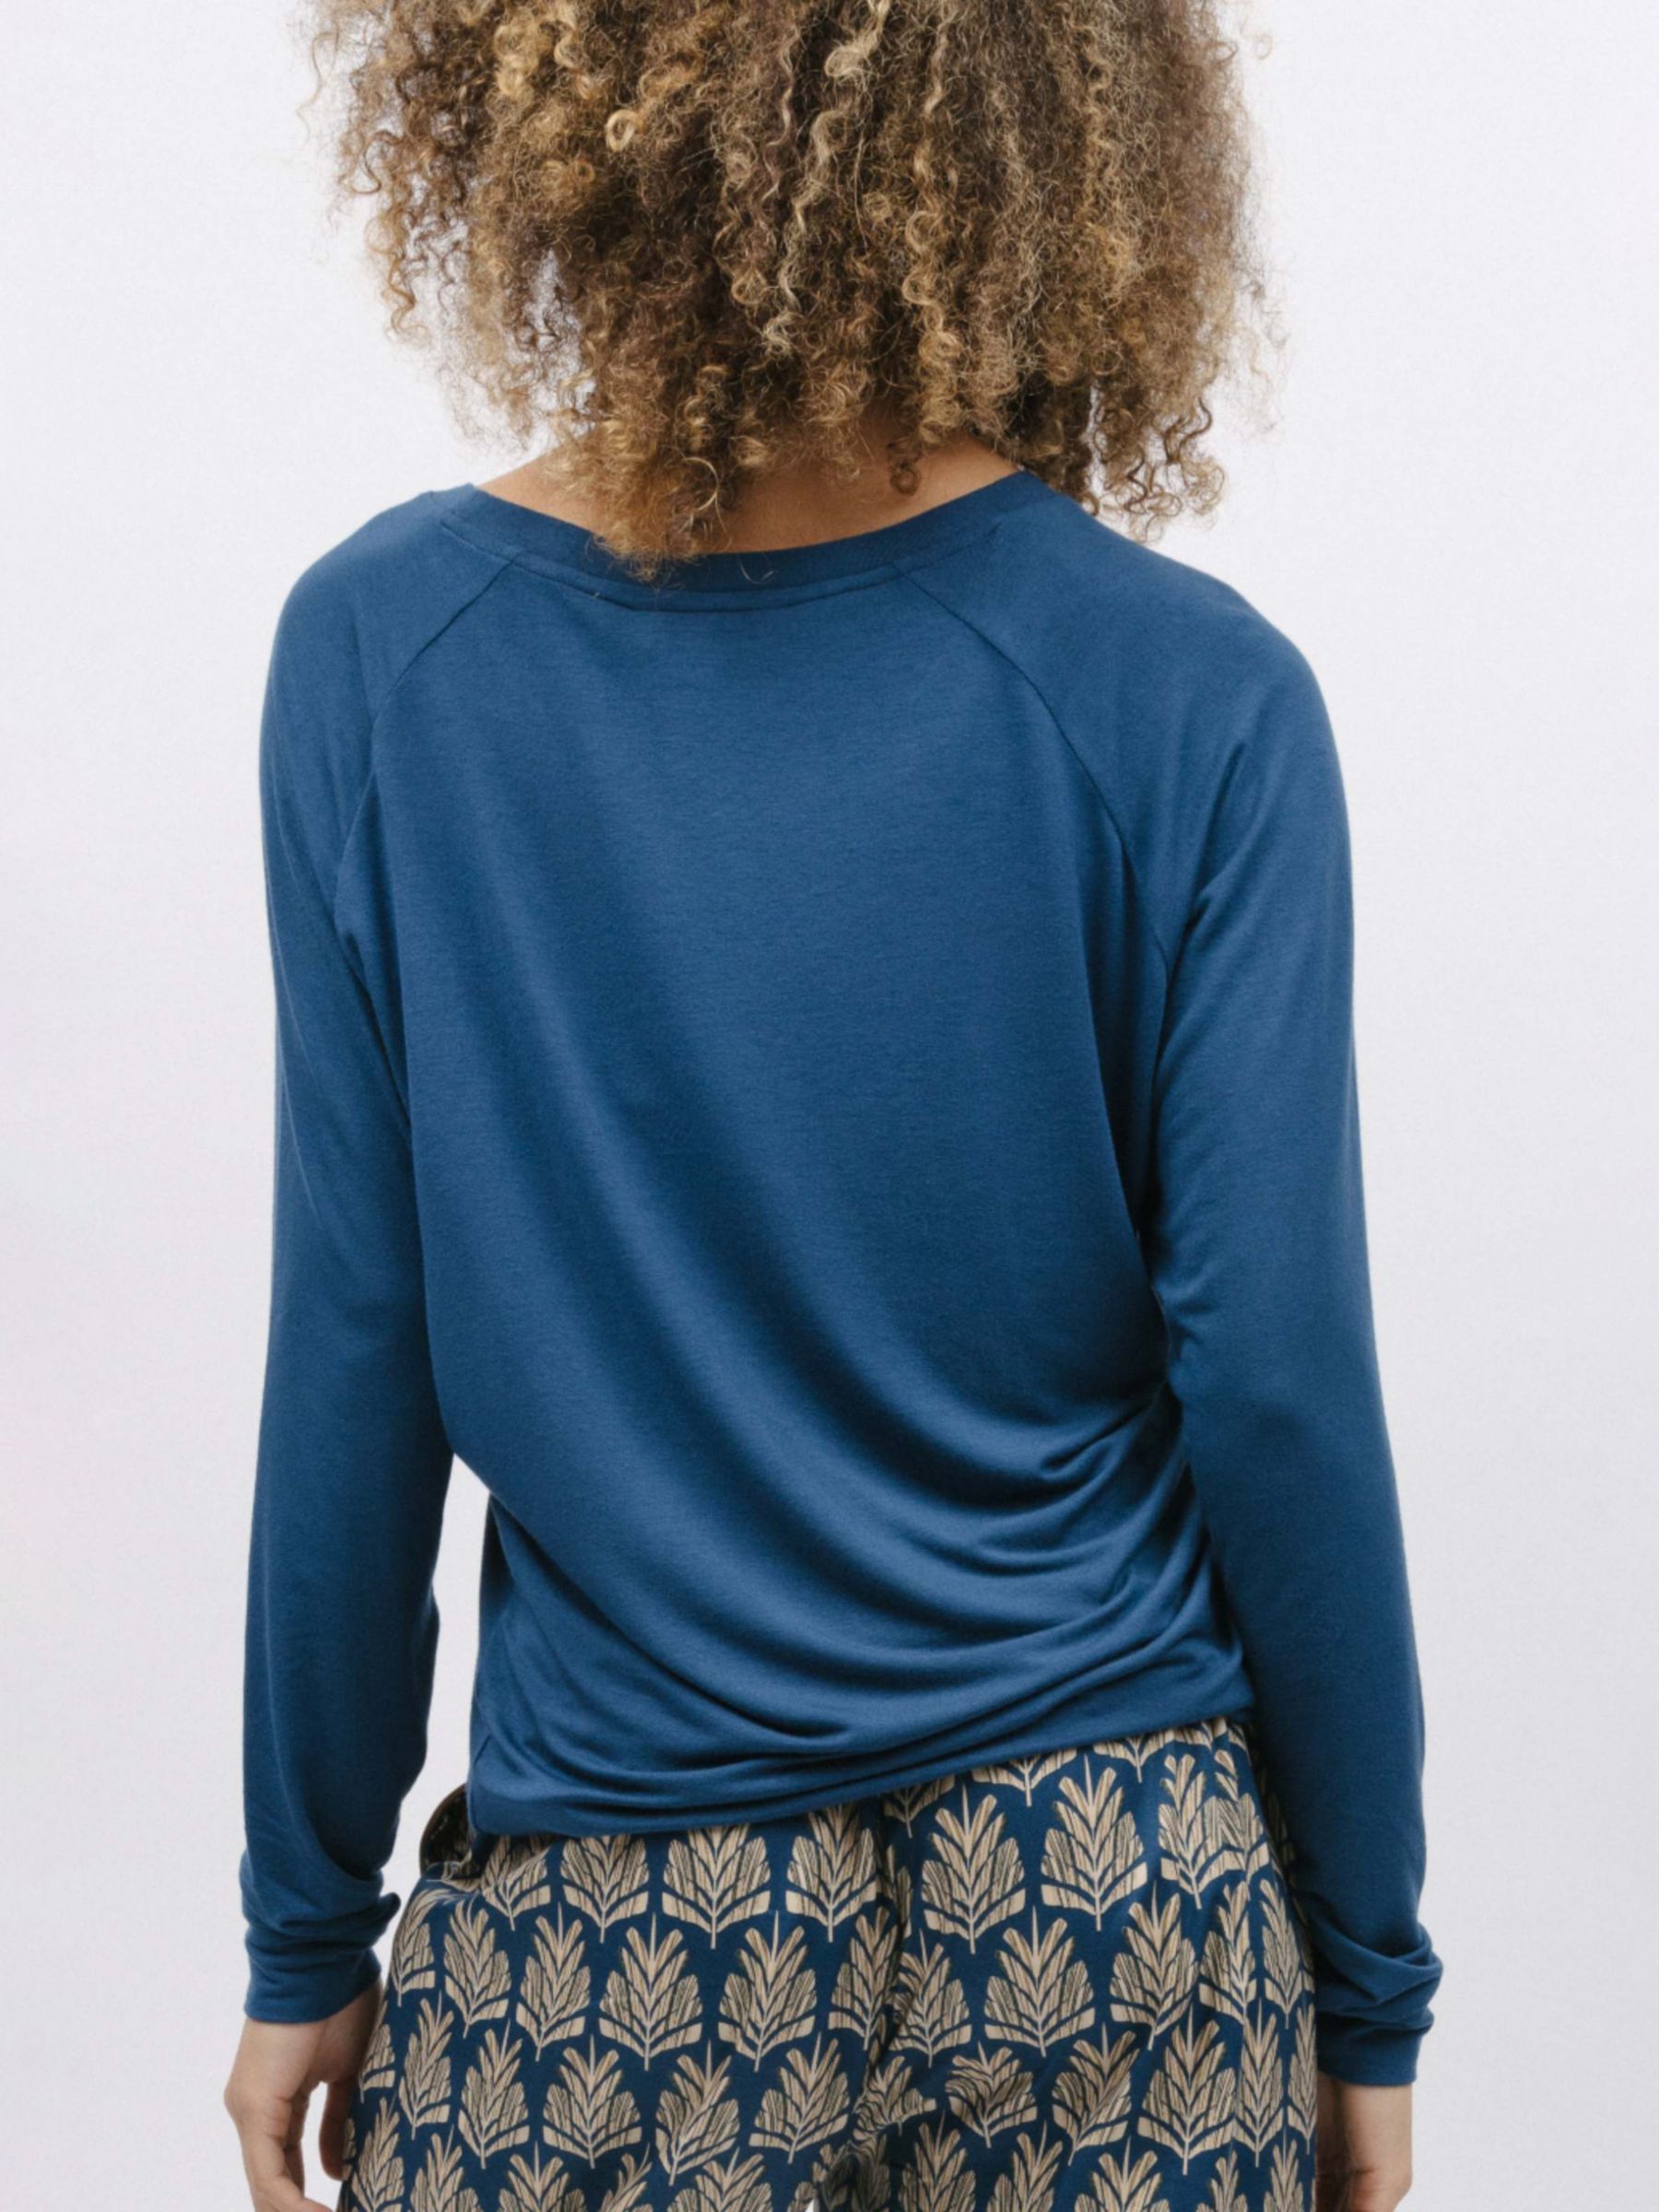 Buy Cyberjammies Fawn Blue Knit Jersey Slouch Top, Blue Online at johnlewis.com